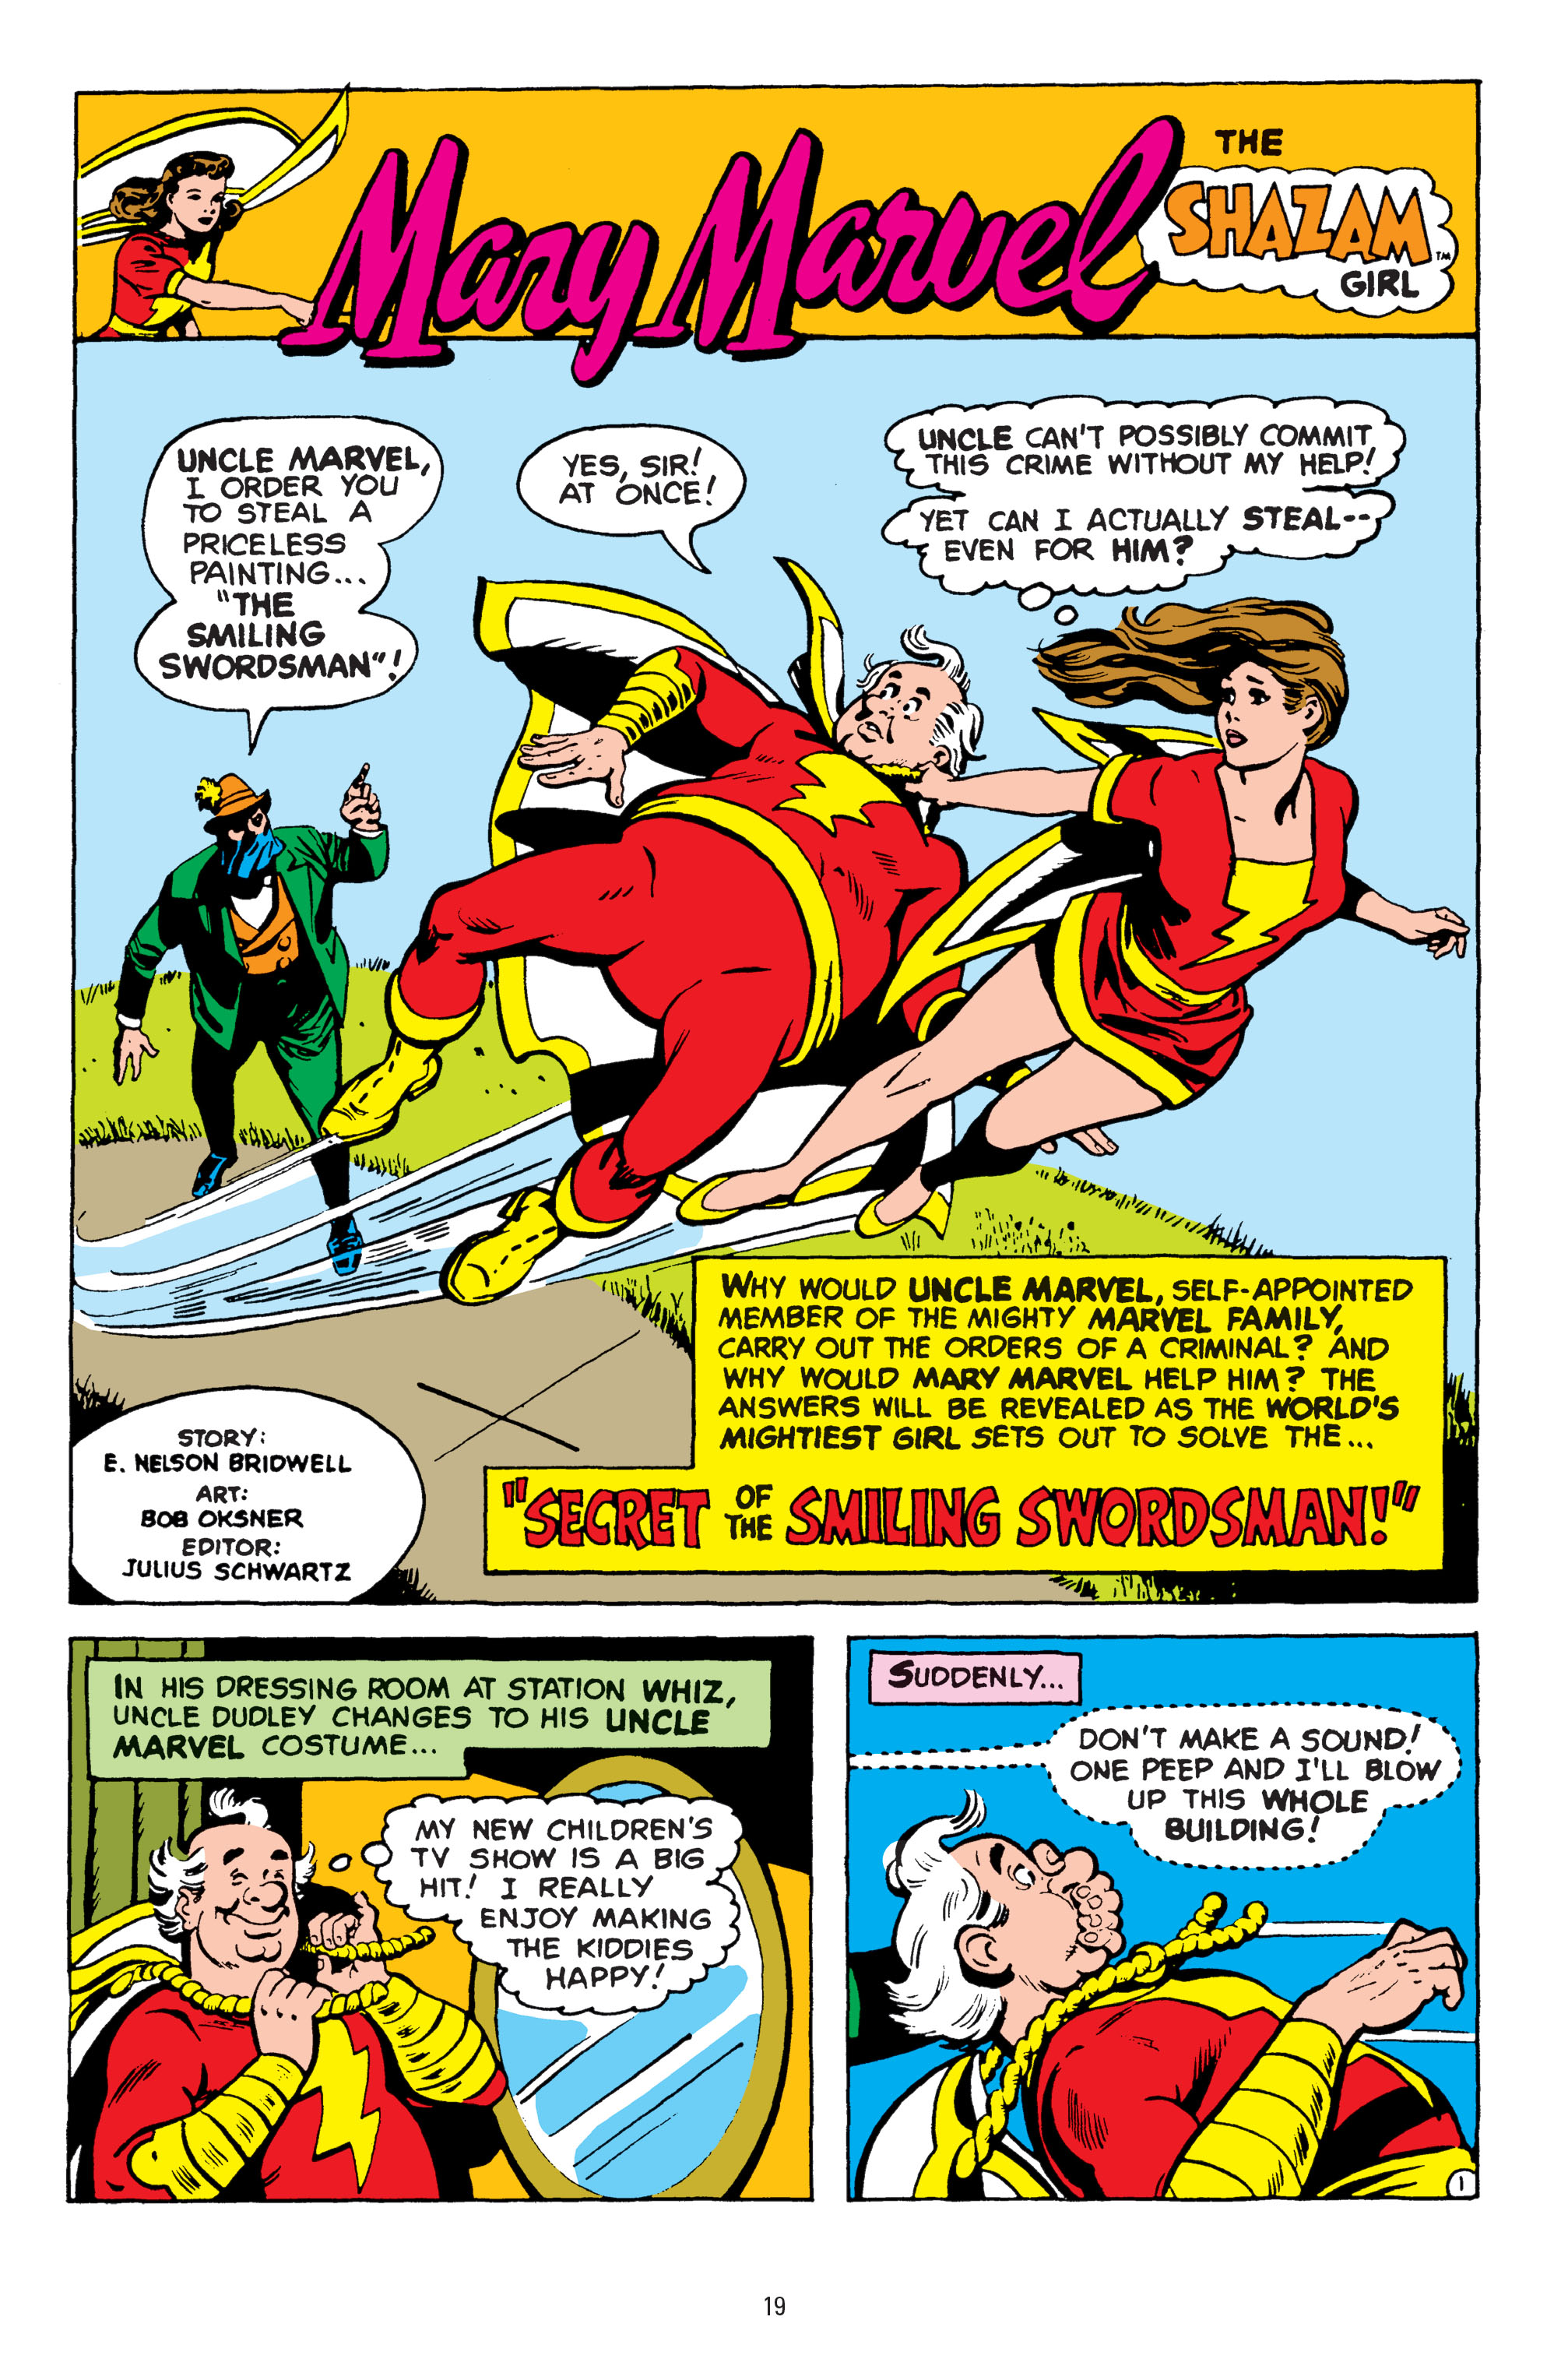 Read online Shazam!: The World's Mightiest Mortal comic -  Issue # TPB 2 (Part 1) - 19